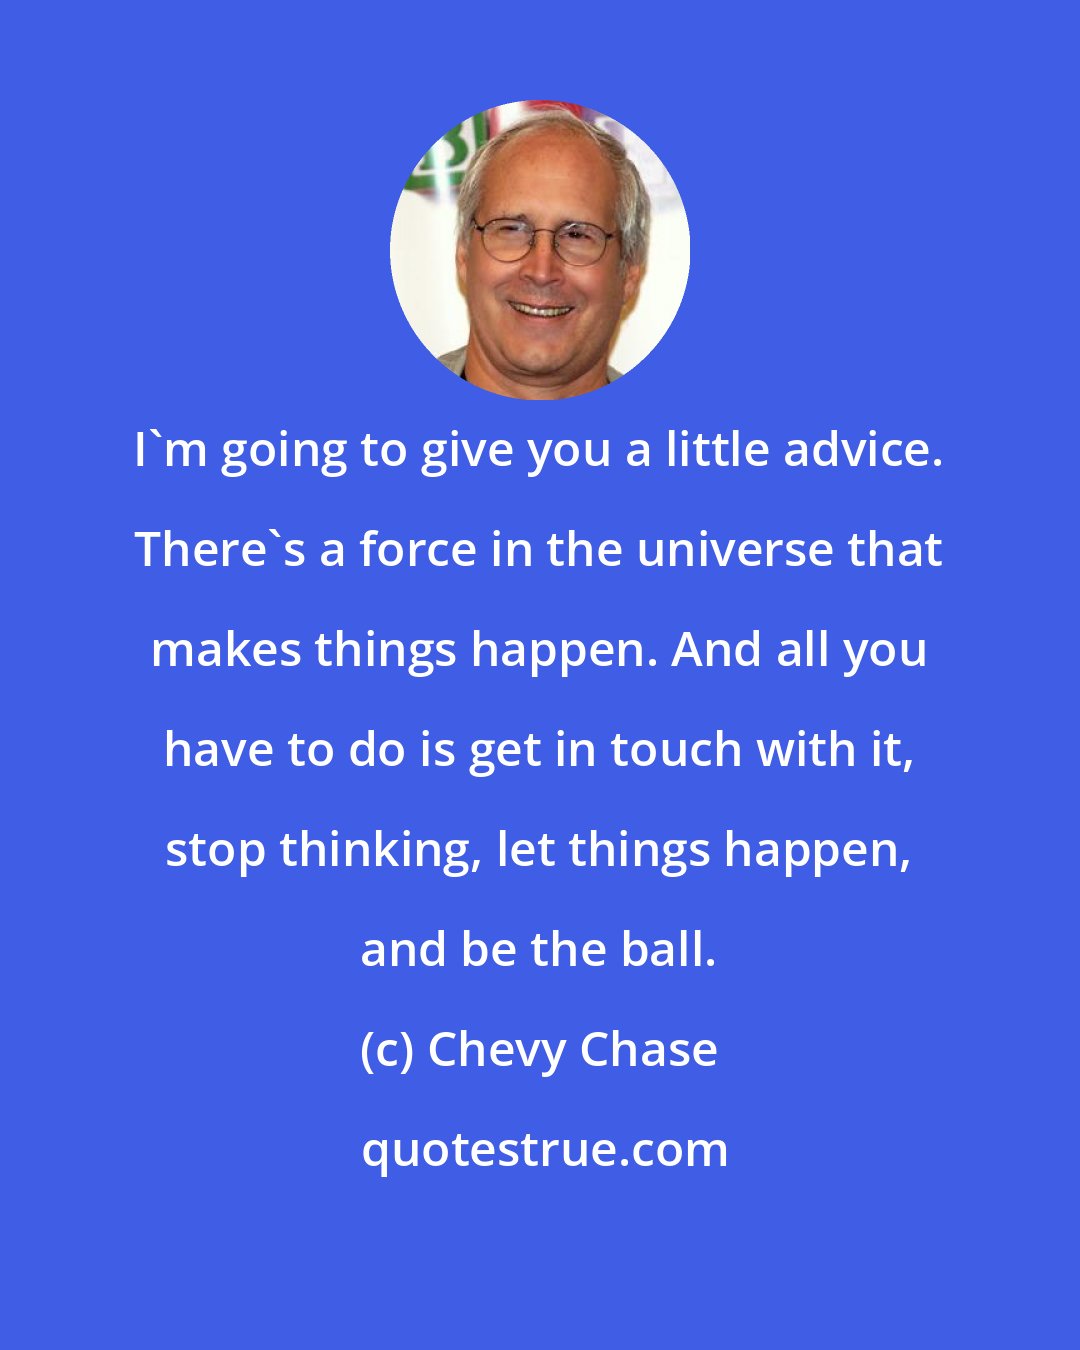 Chevy Chase: I'm going to give you a little advice. There's a force in the universe that makes things happen. And all you have to do is get in touch with it, stop thinking, let things happen, and be the ball.